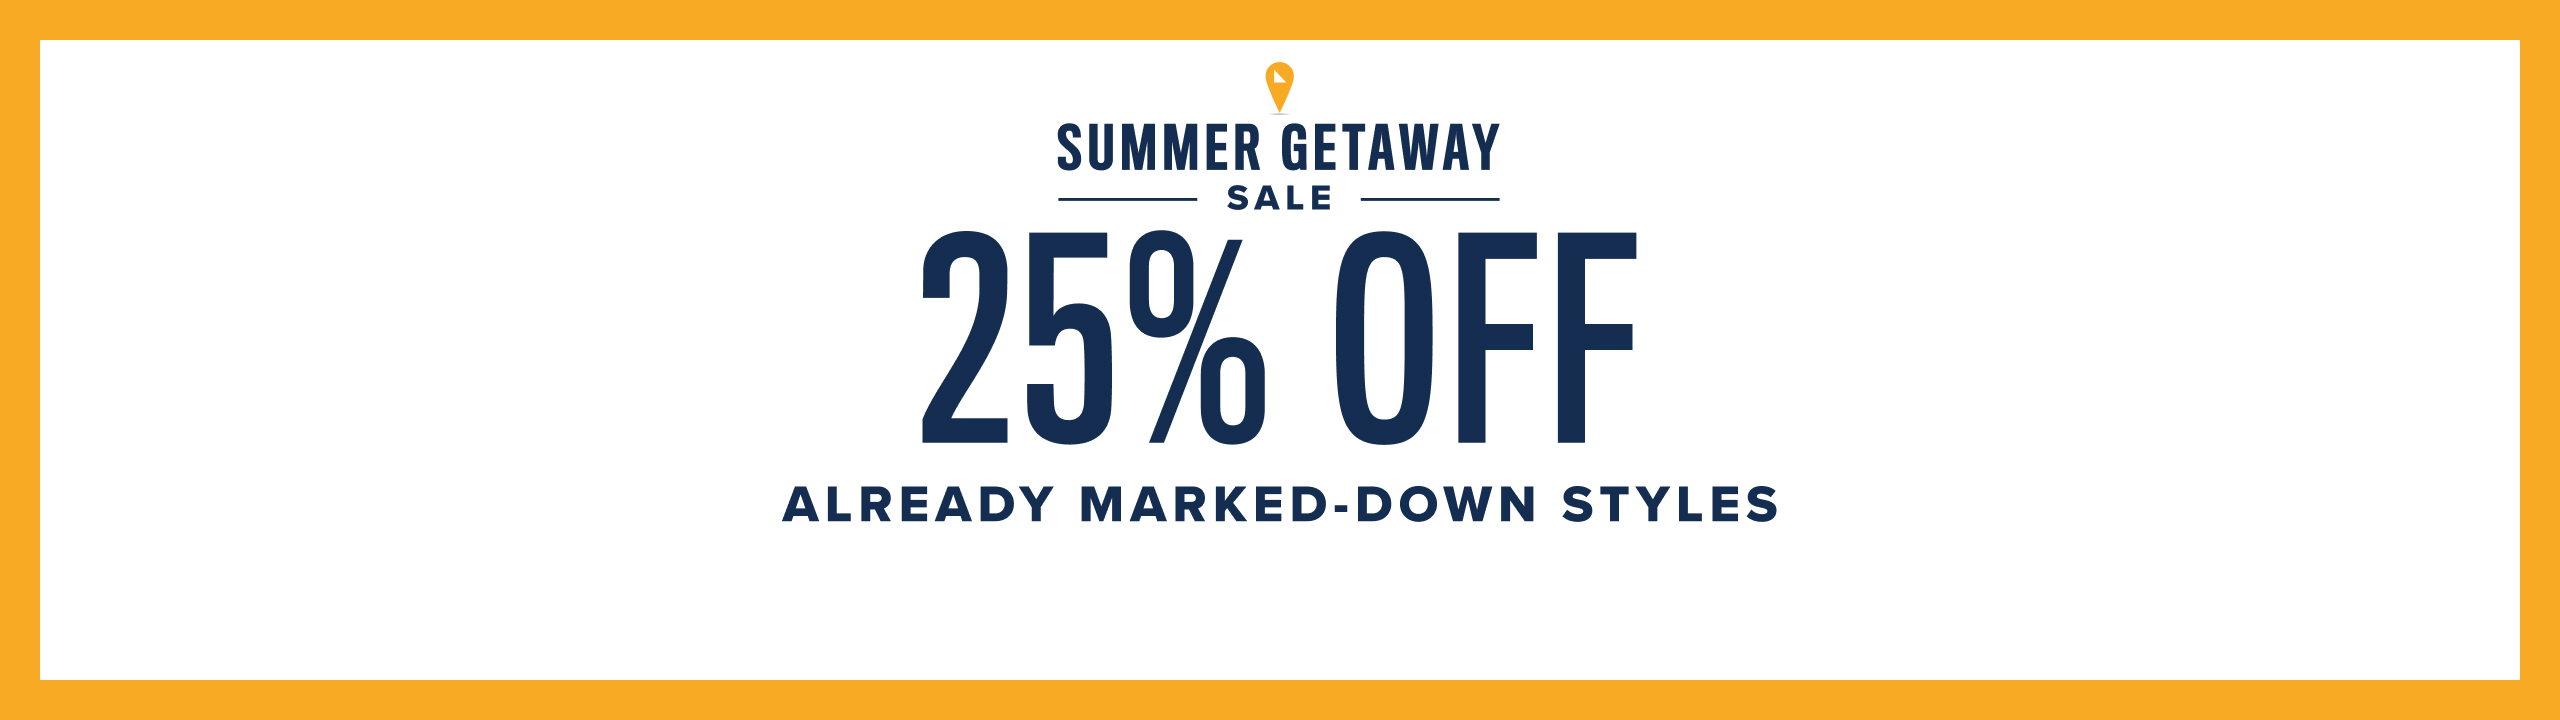 Summer getaway sale 25% off already marked down styles. 